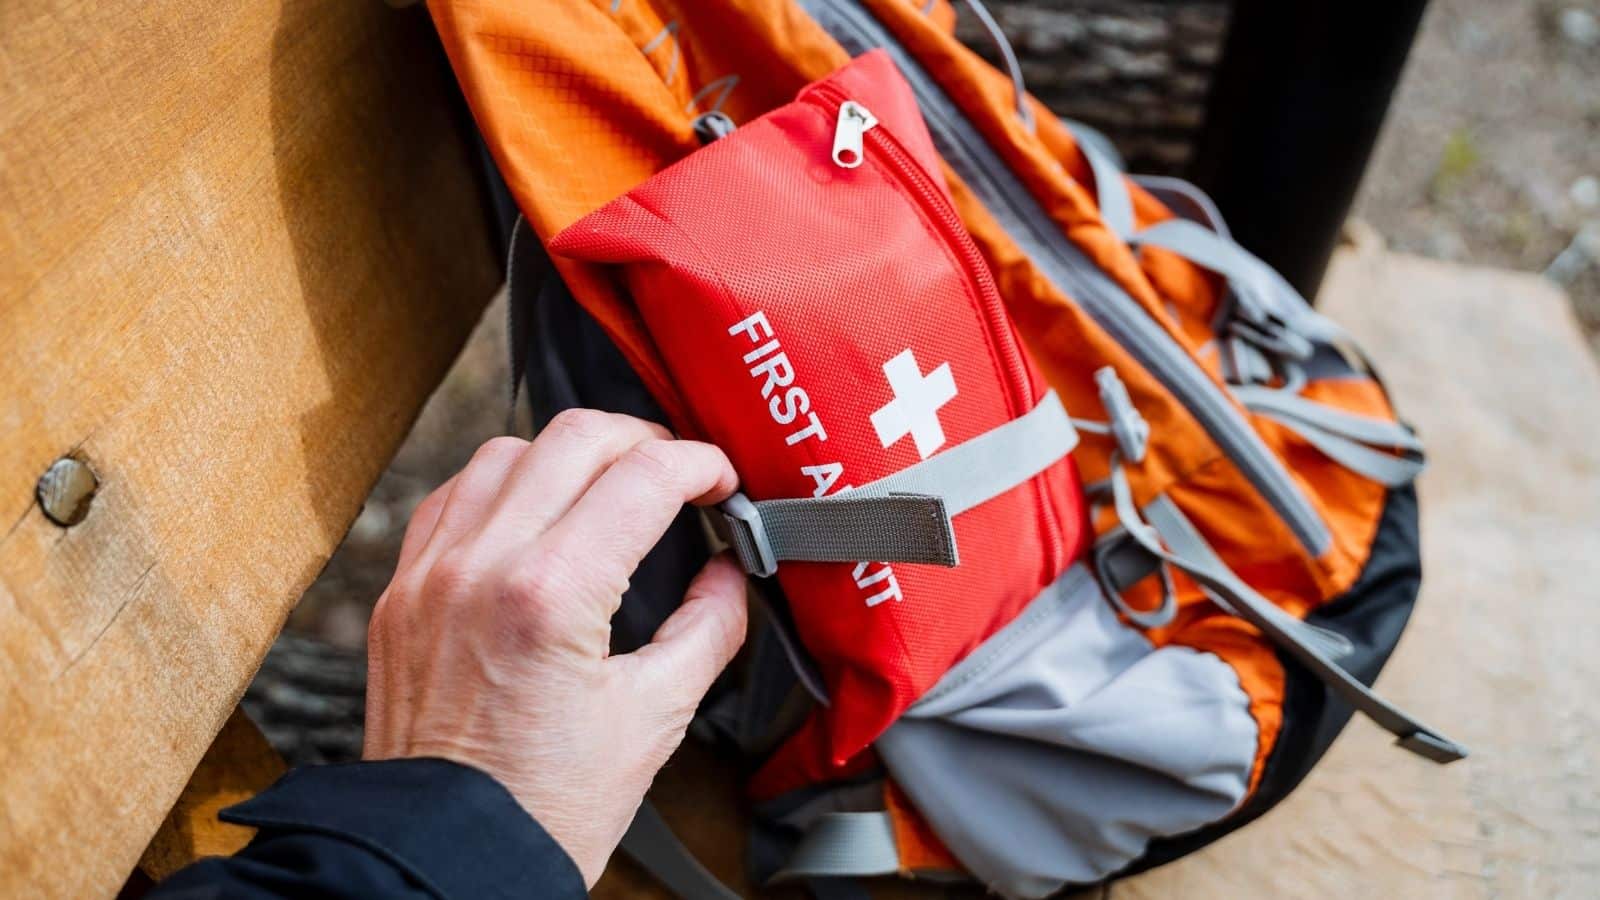 <p>A compact first-aid pack is a lifesaver. This should be a standard kit with band-aids in multiple sizes and anti-septic wipes, pain medications, and any personal medications you might require. Minor injuries or illnesses are bound to happen, and it always pays to be prepared.</p>